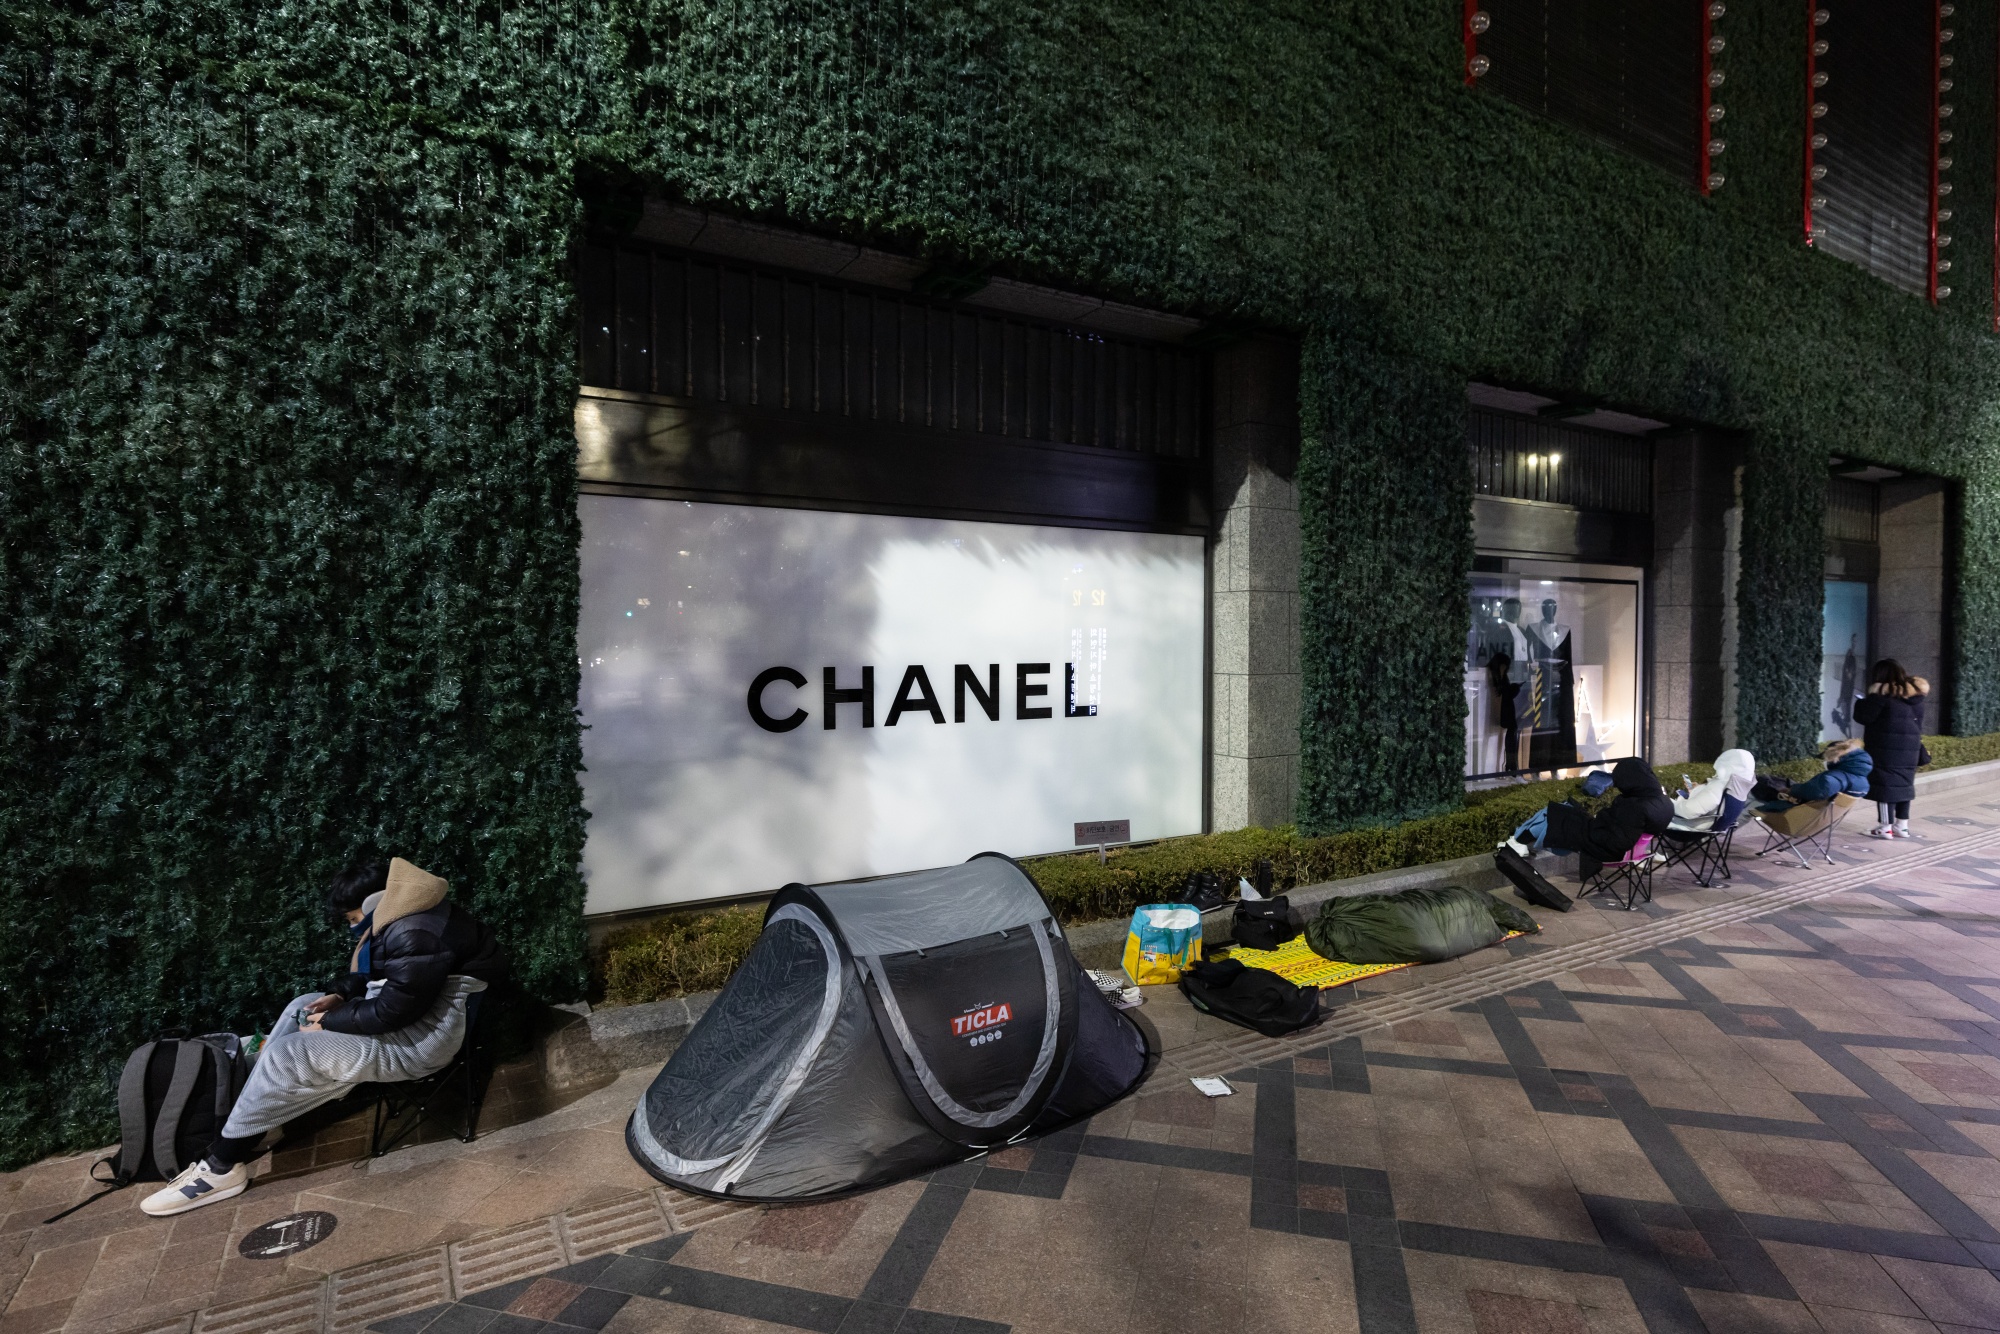 Why Chanel Bags Have Shoppers Frenzied, Fighting to Avoid Price Hikes in  Korea - Bloomberg